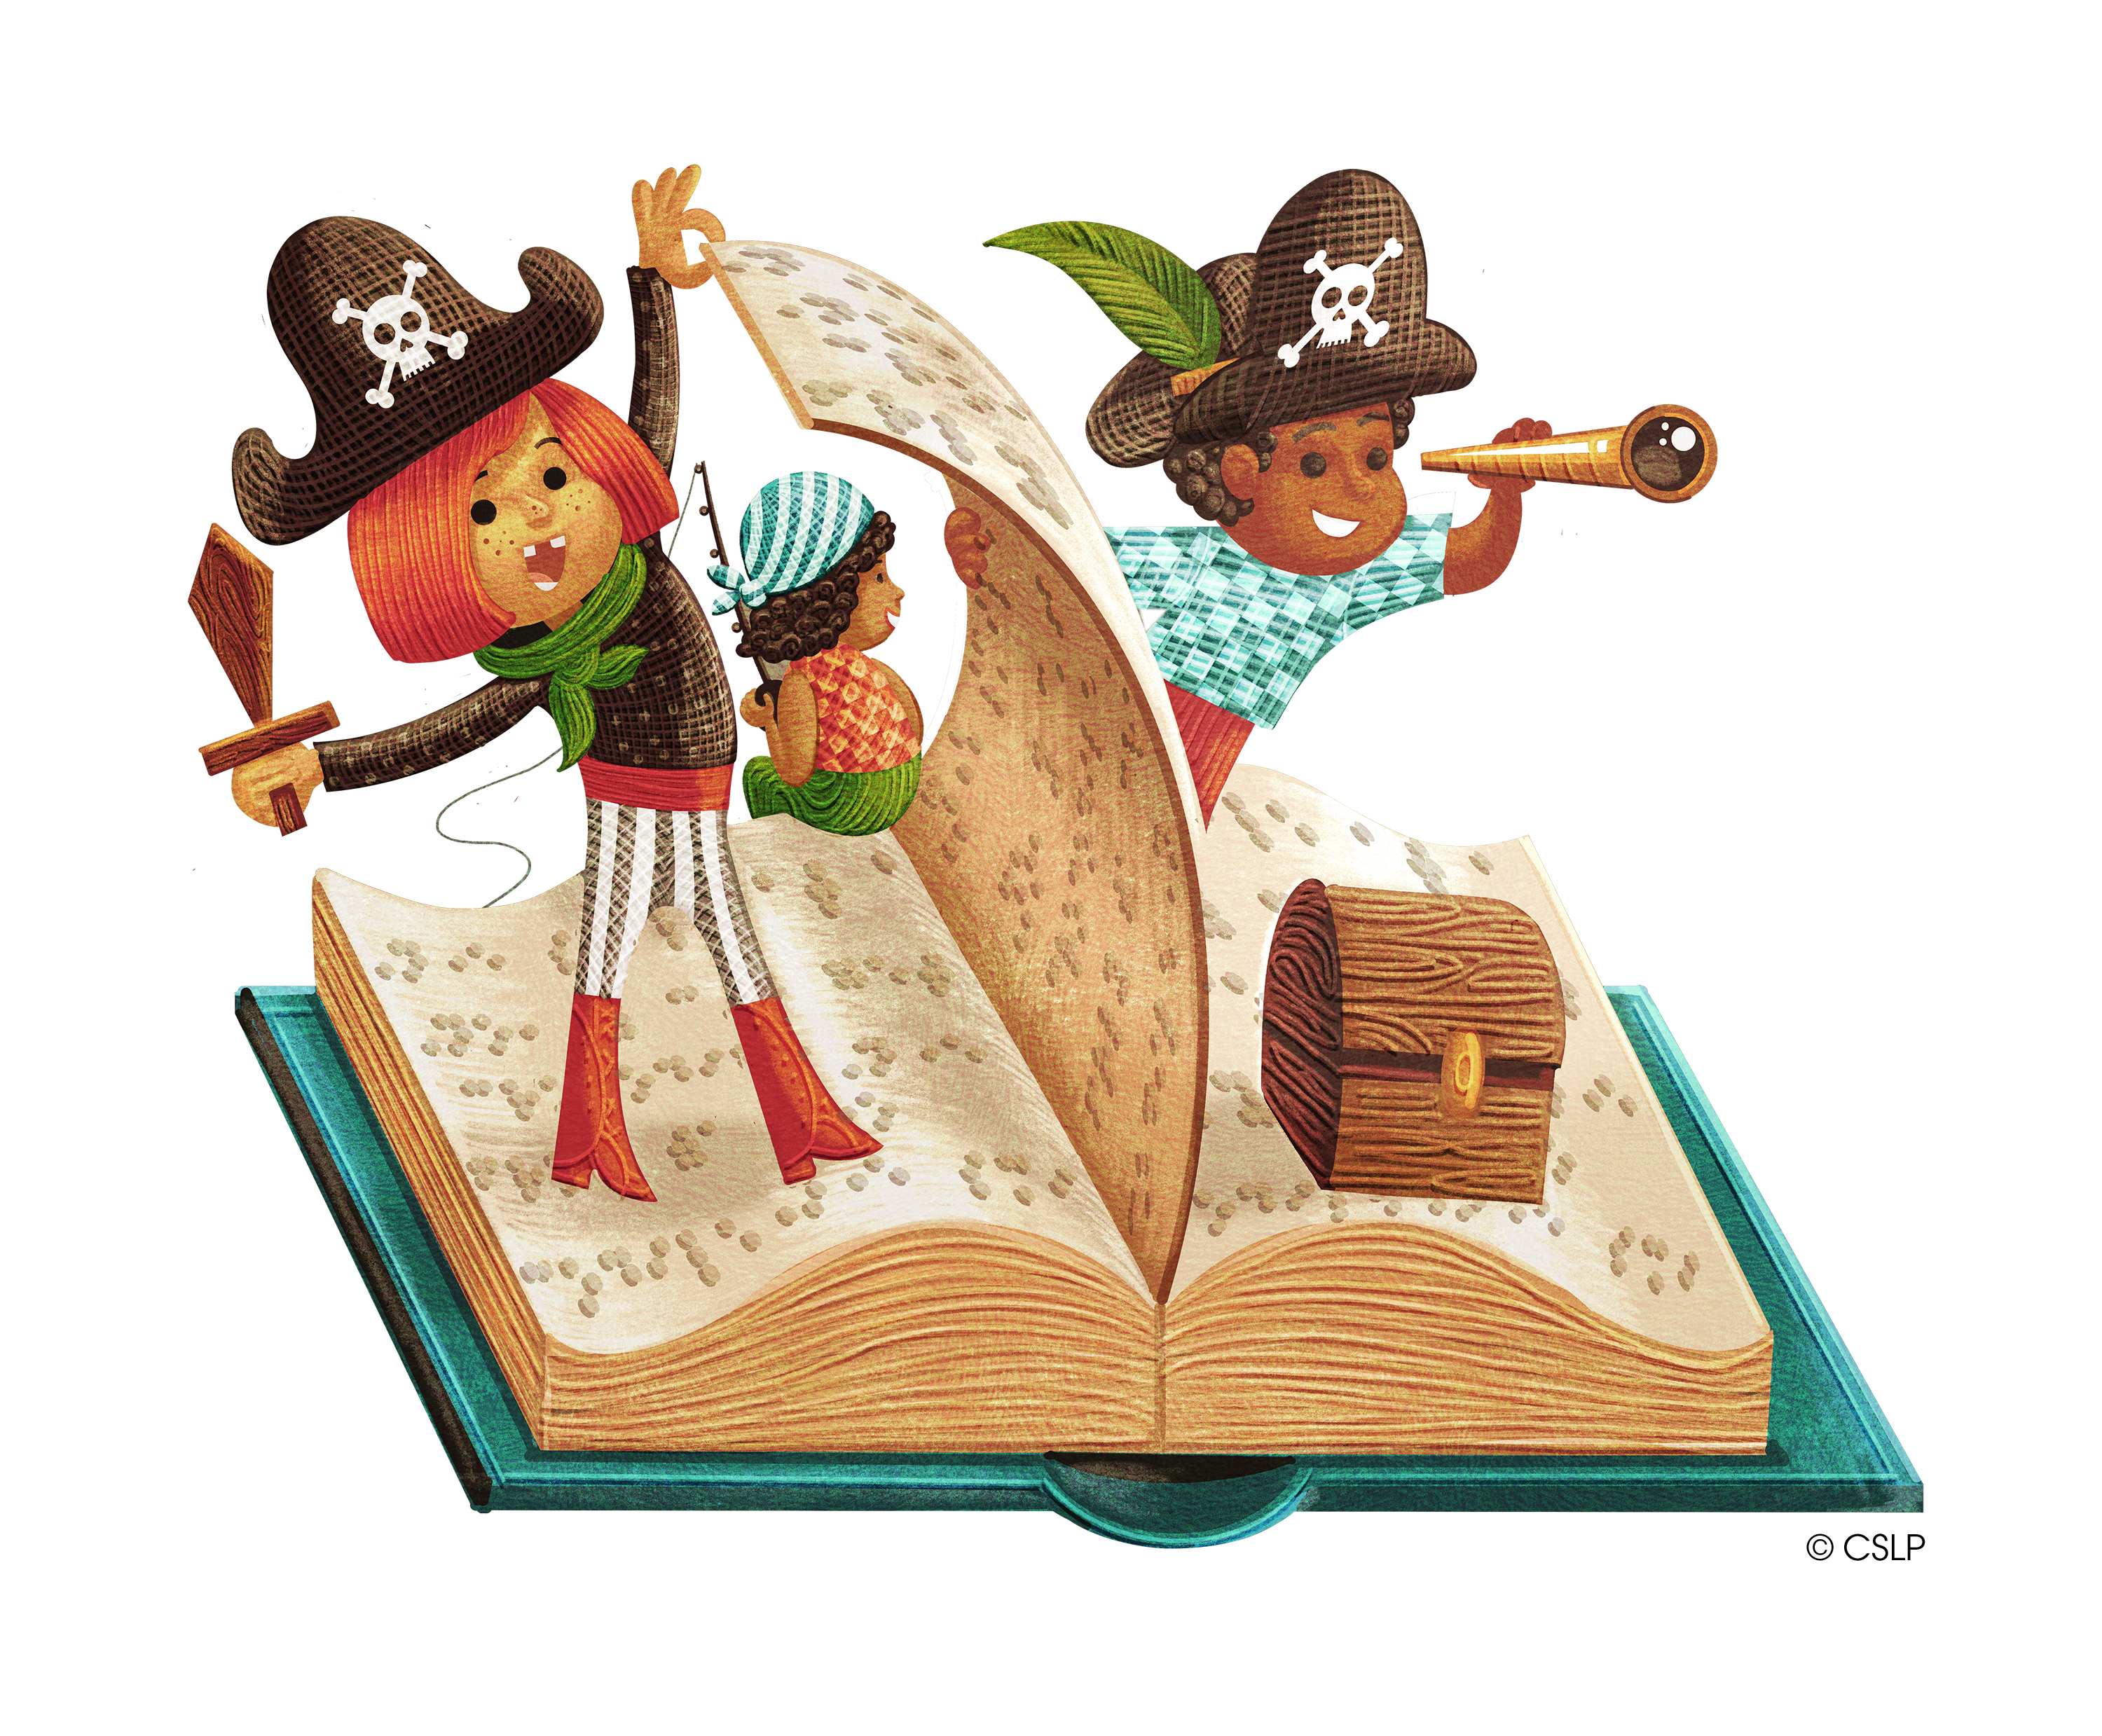 Three children dressed as pirates sailing on a giant book.